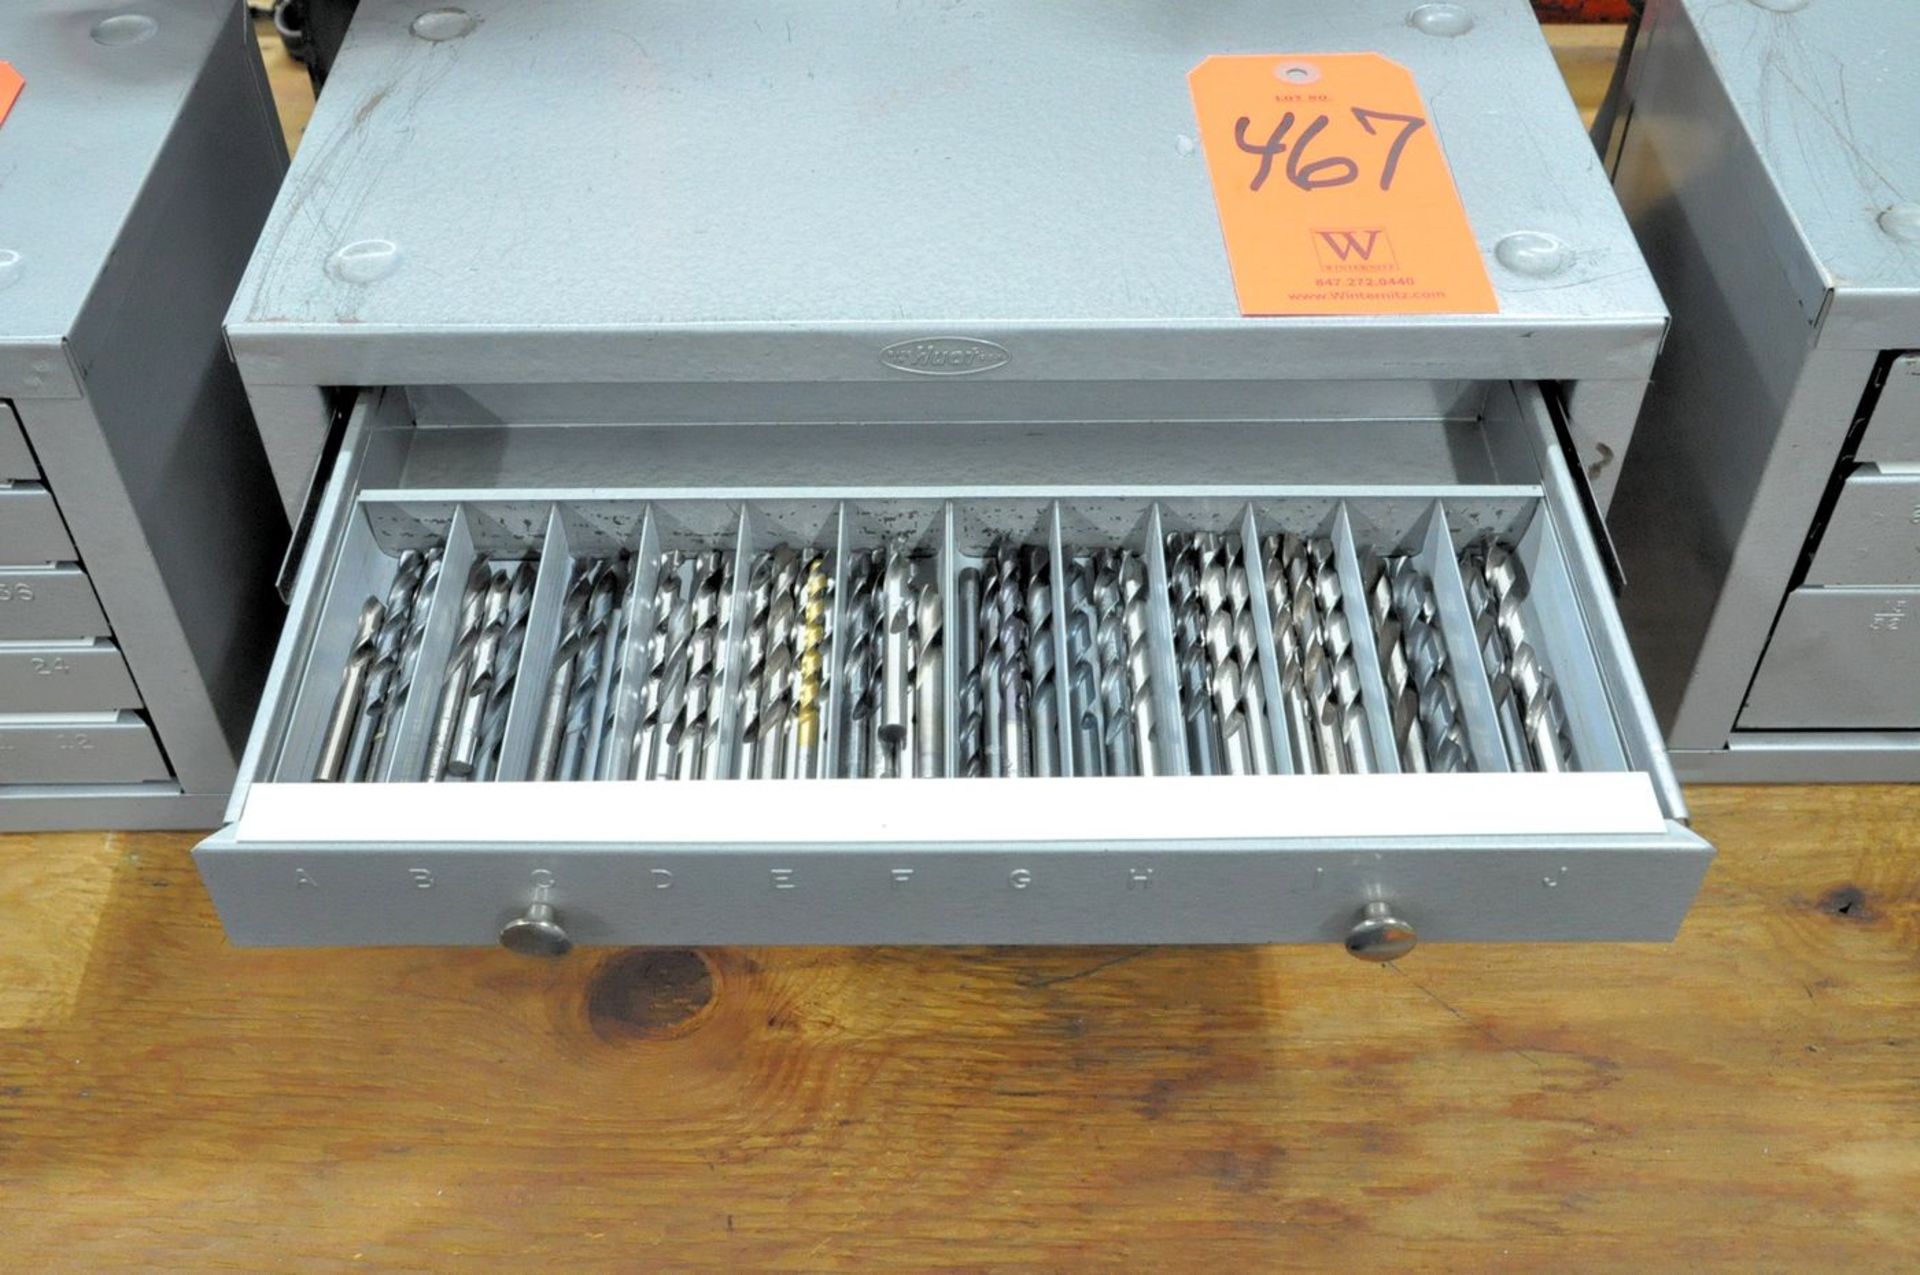 Huot 14-5/8"W X 7-1/2"D x 7-7/8"H 3-Drawer Index Cabinet with Drills - Image 2 of 4